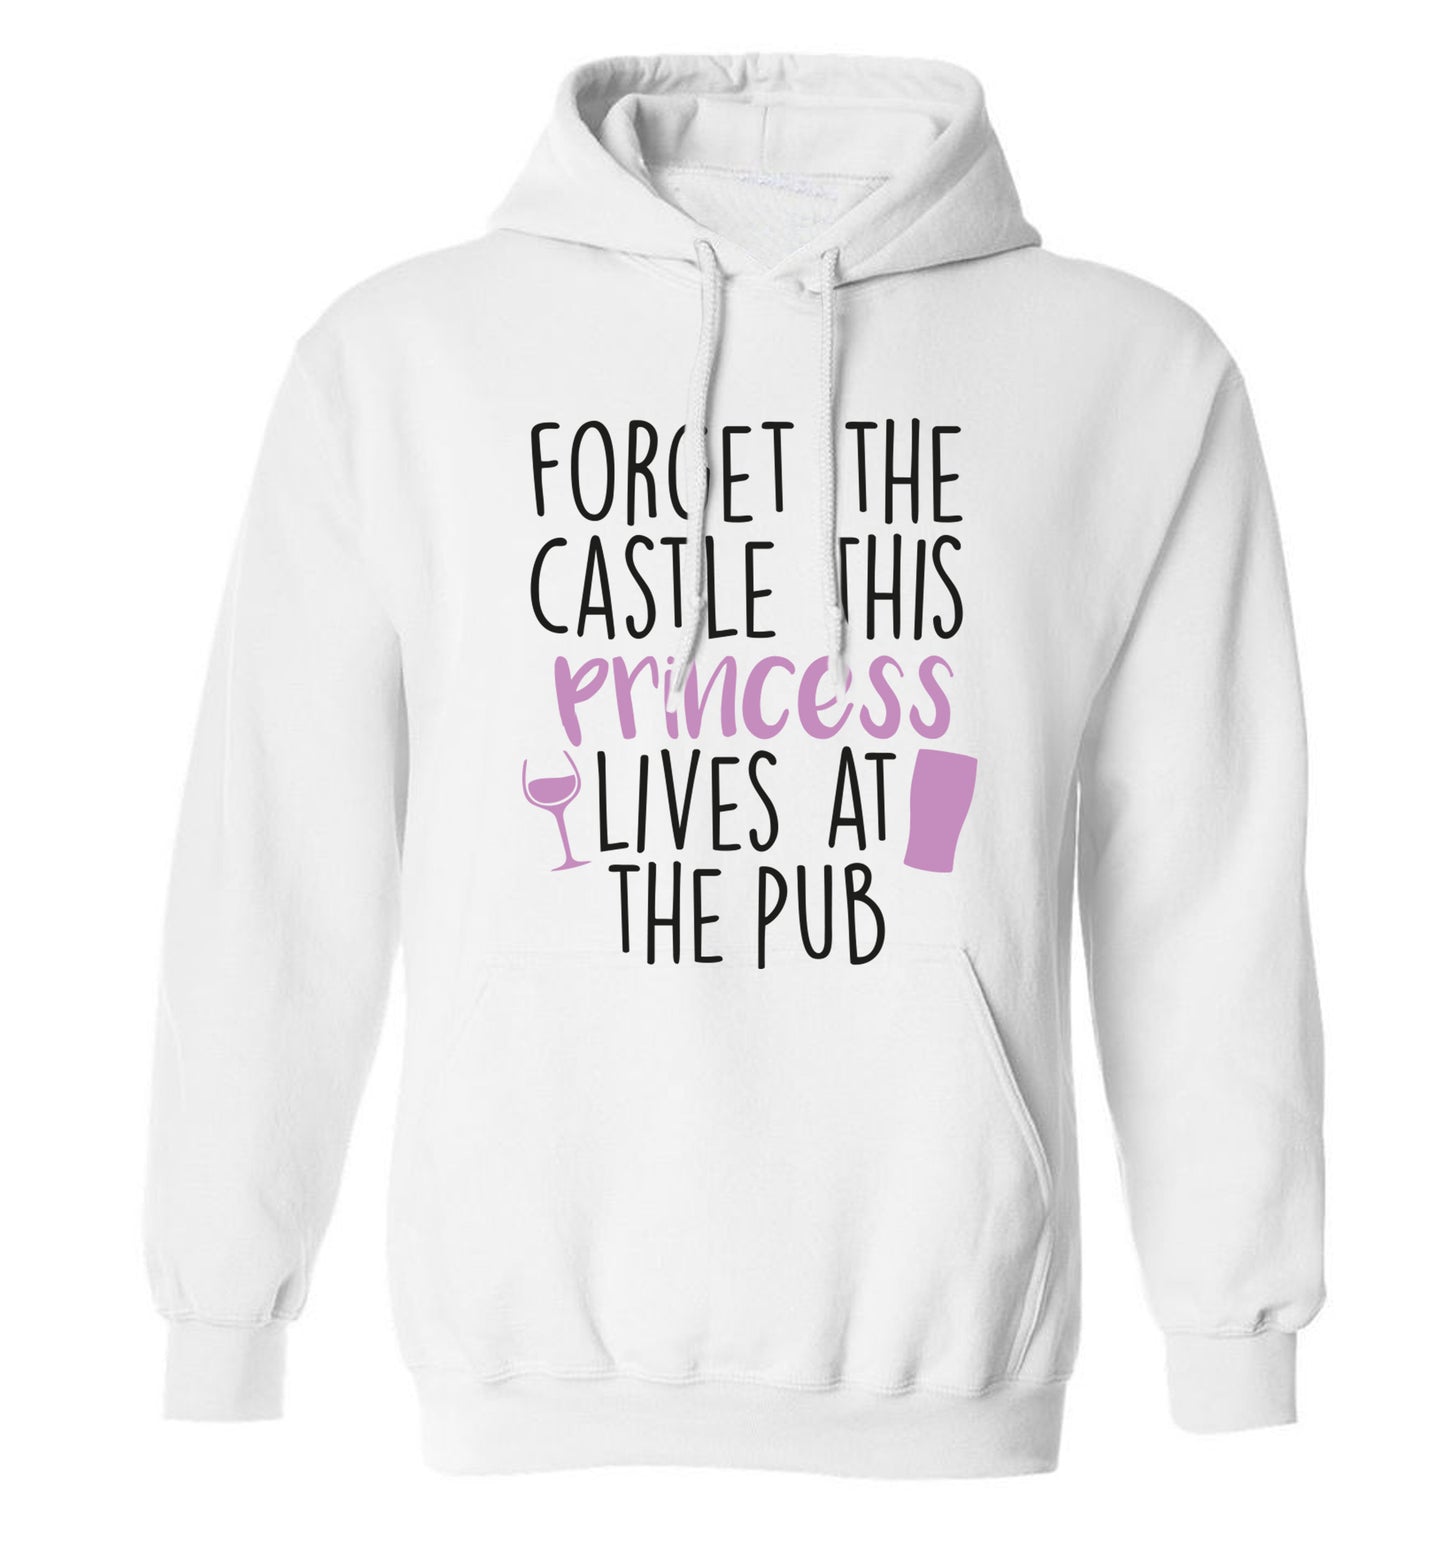 Forget the castle this princess lives at the pub adults unisex white hoodie 2XL